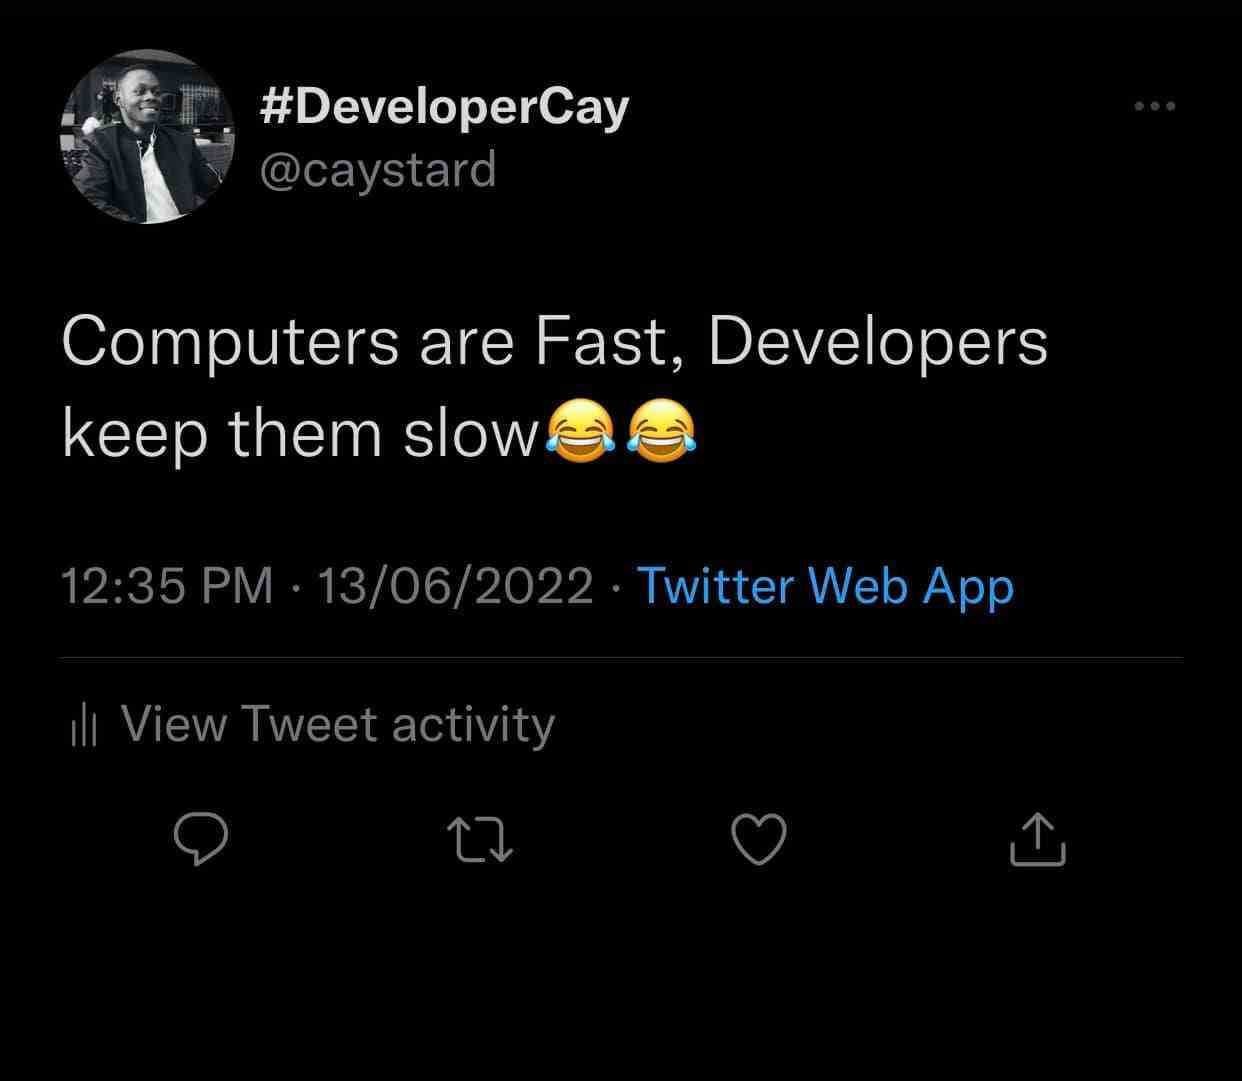 Computers are fast, Developers keep them slow